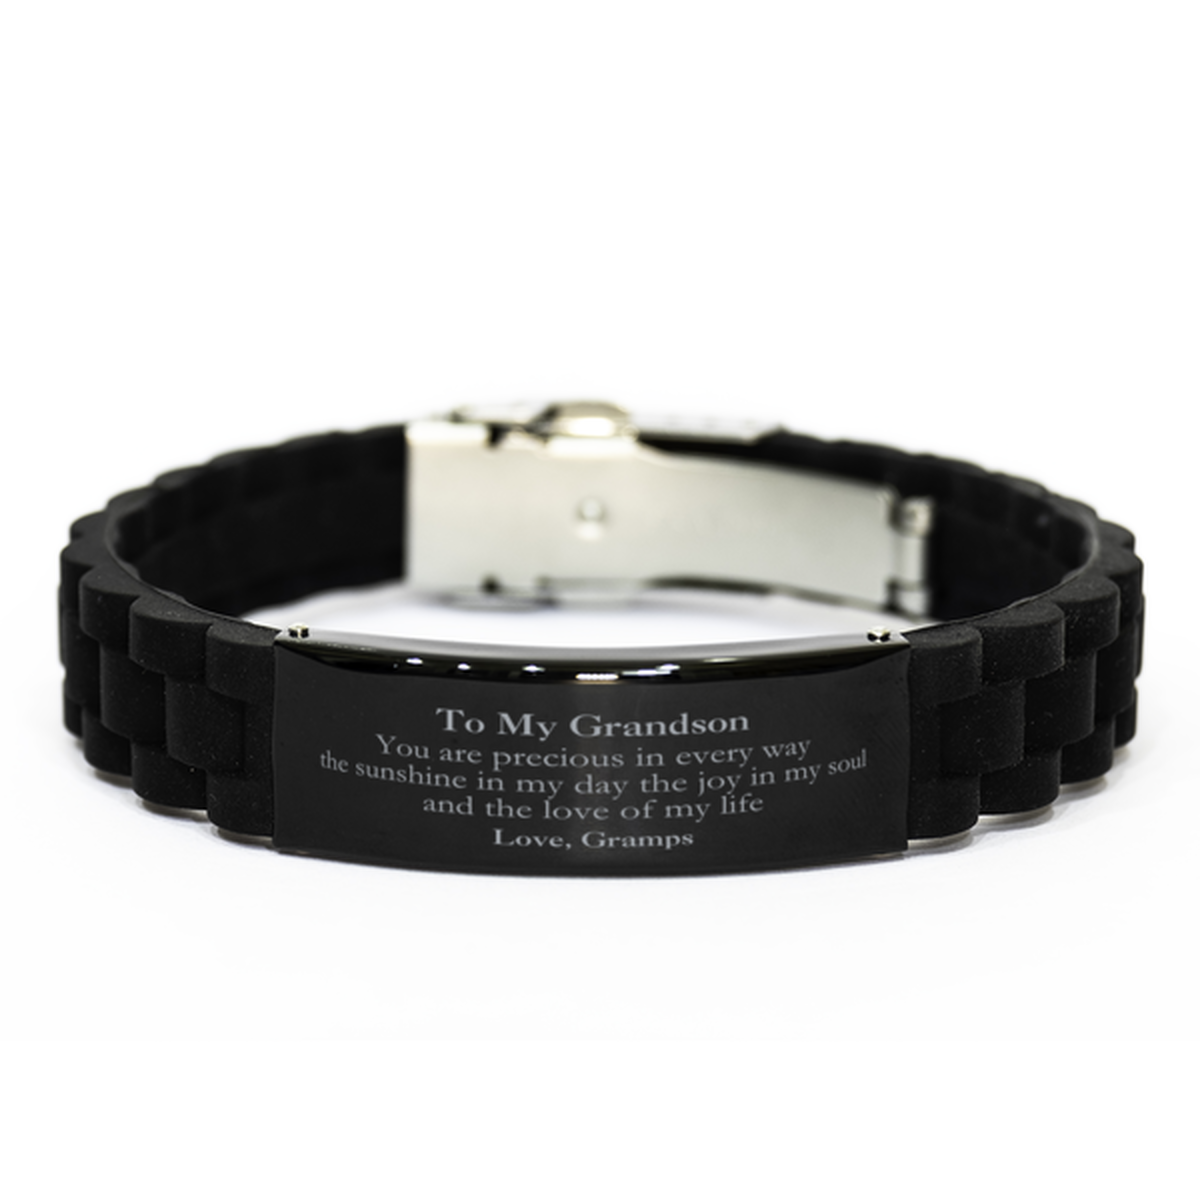 Graduation Gifts for Grandson Black Glidelock Clasp Bracelet Present from Gramps, Christmas Grandson Birthday Gifts Grandson You are precious in every way the sunshine in my day. Love, Gramps